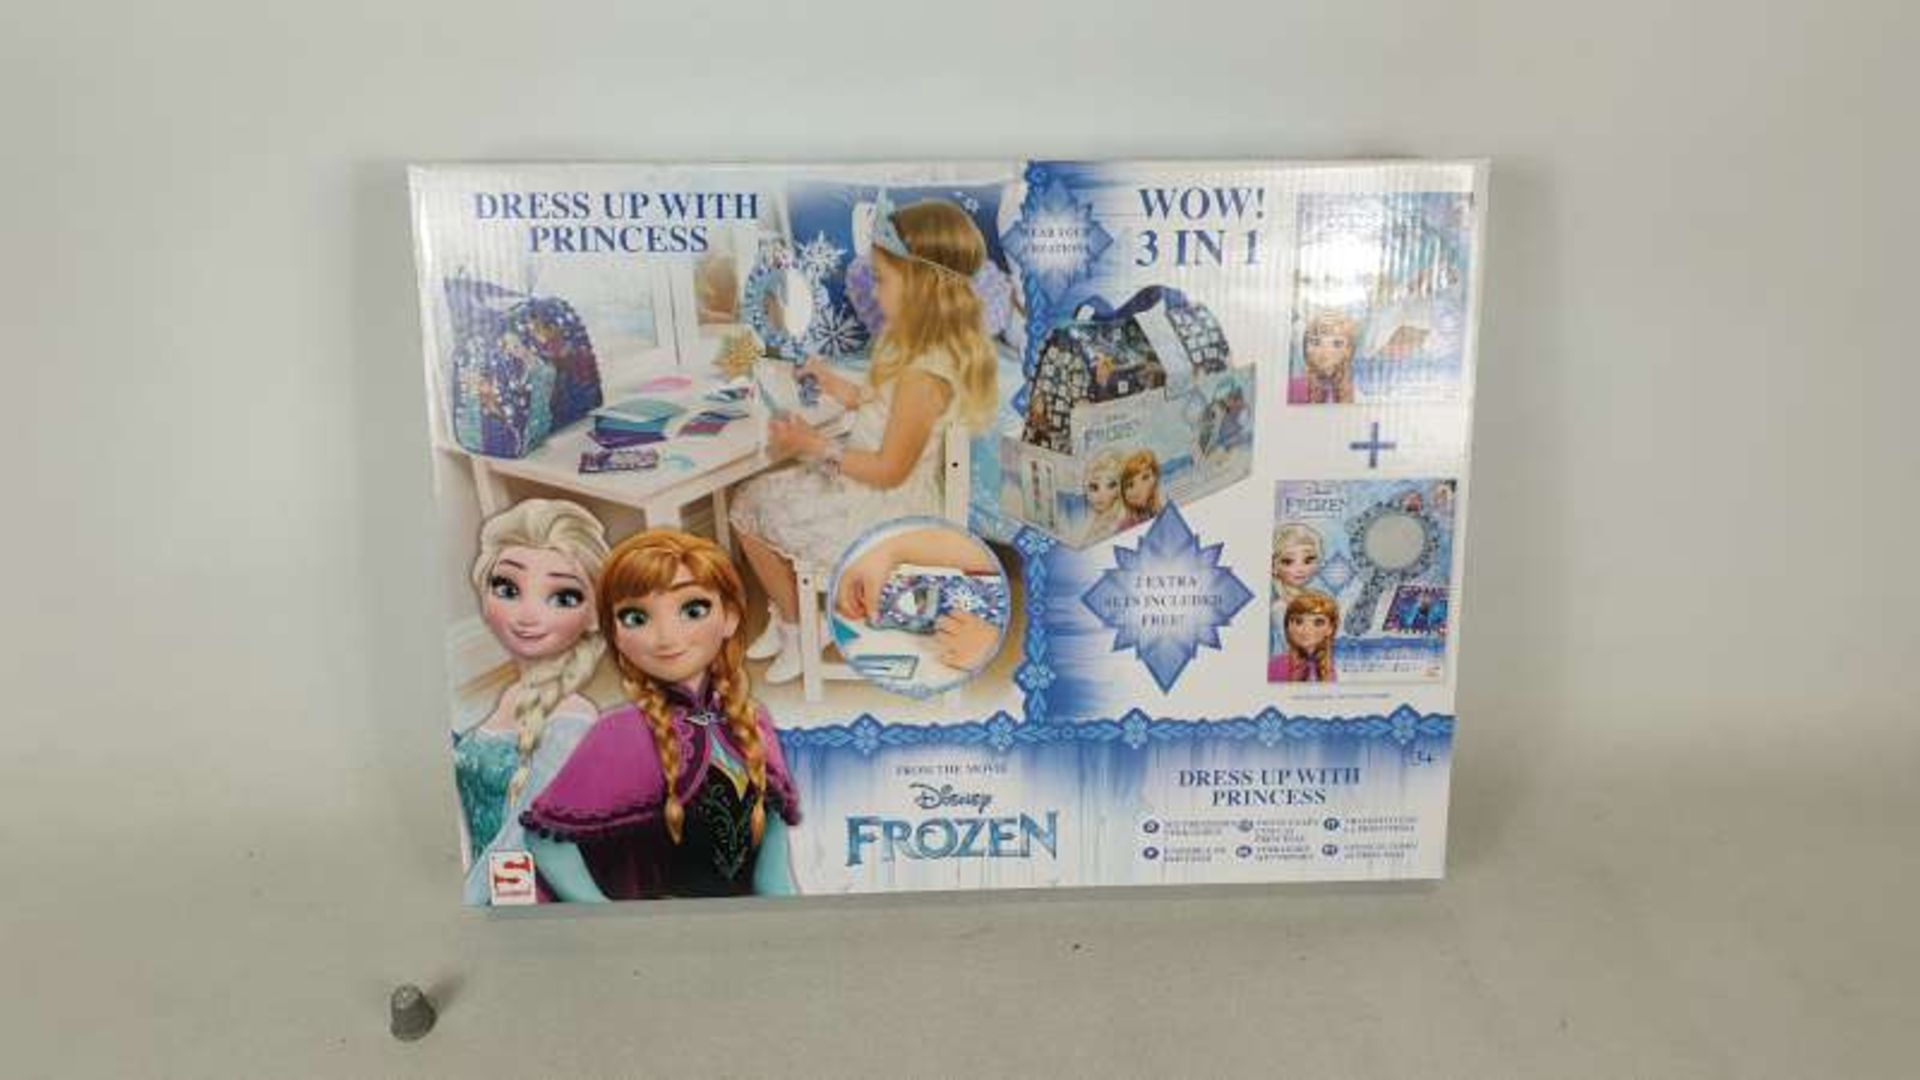 24 X BRAND NEW BOXED DISNEY FROZEN 3 IN 1 DRESS UP WITH PRINCESS IN 4 BOXES